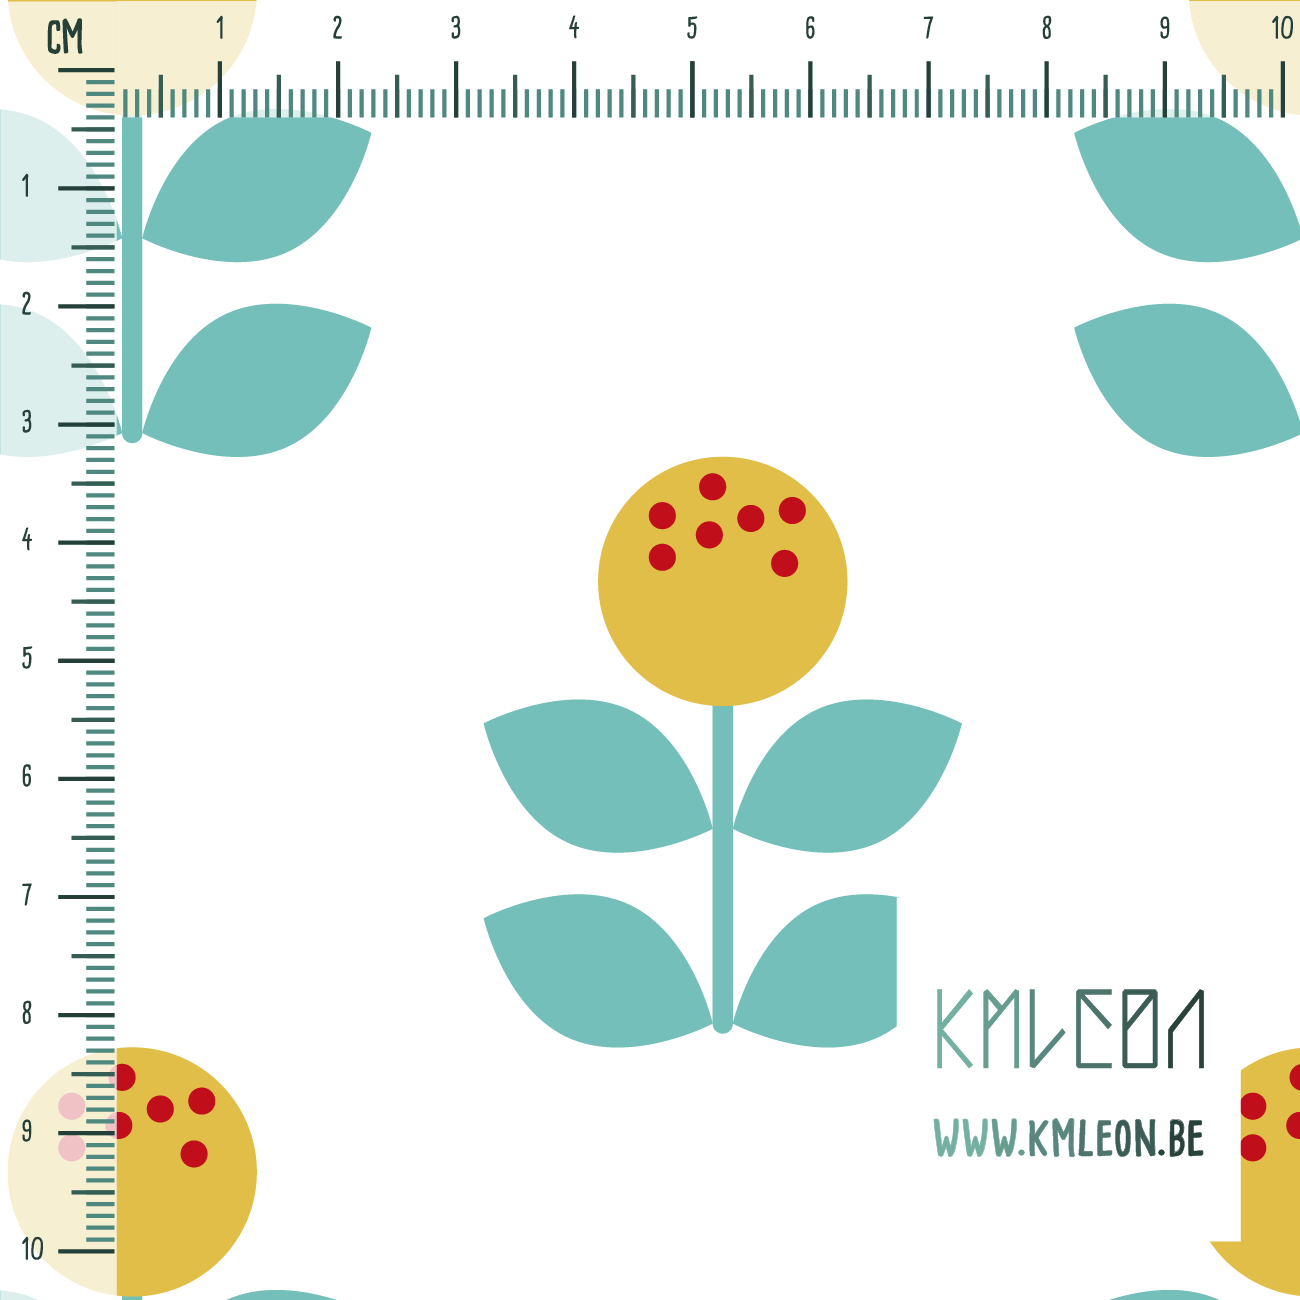 Large yellow and teal flowers fabric